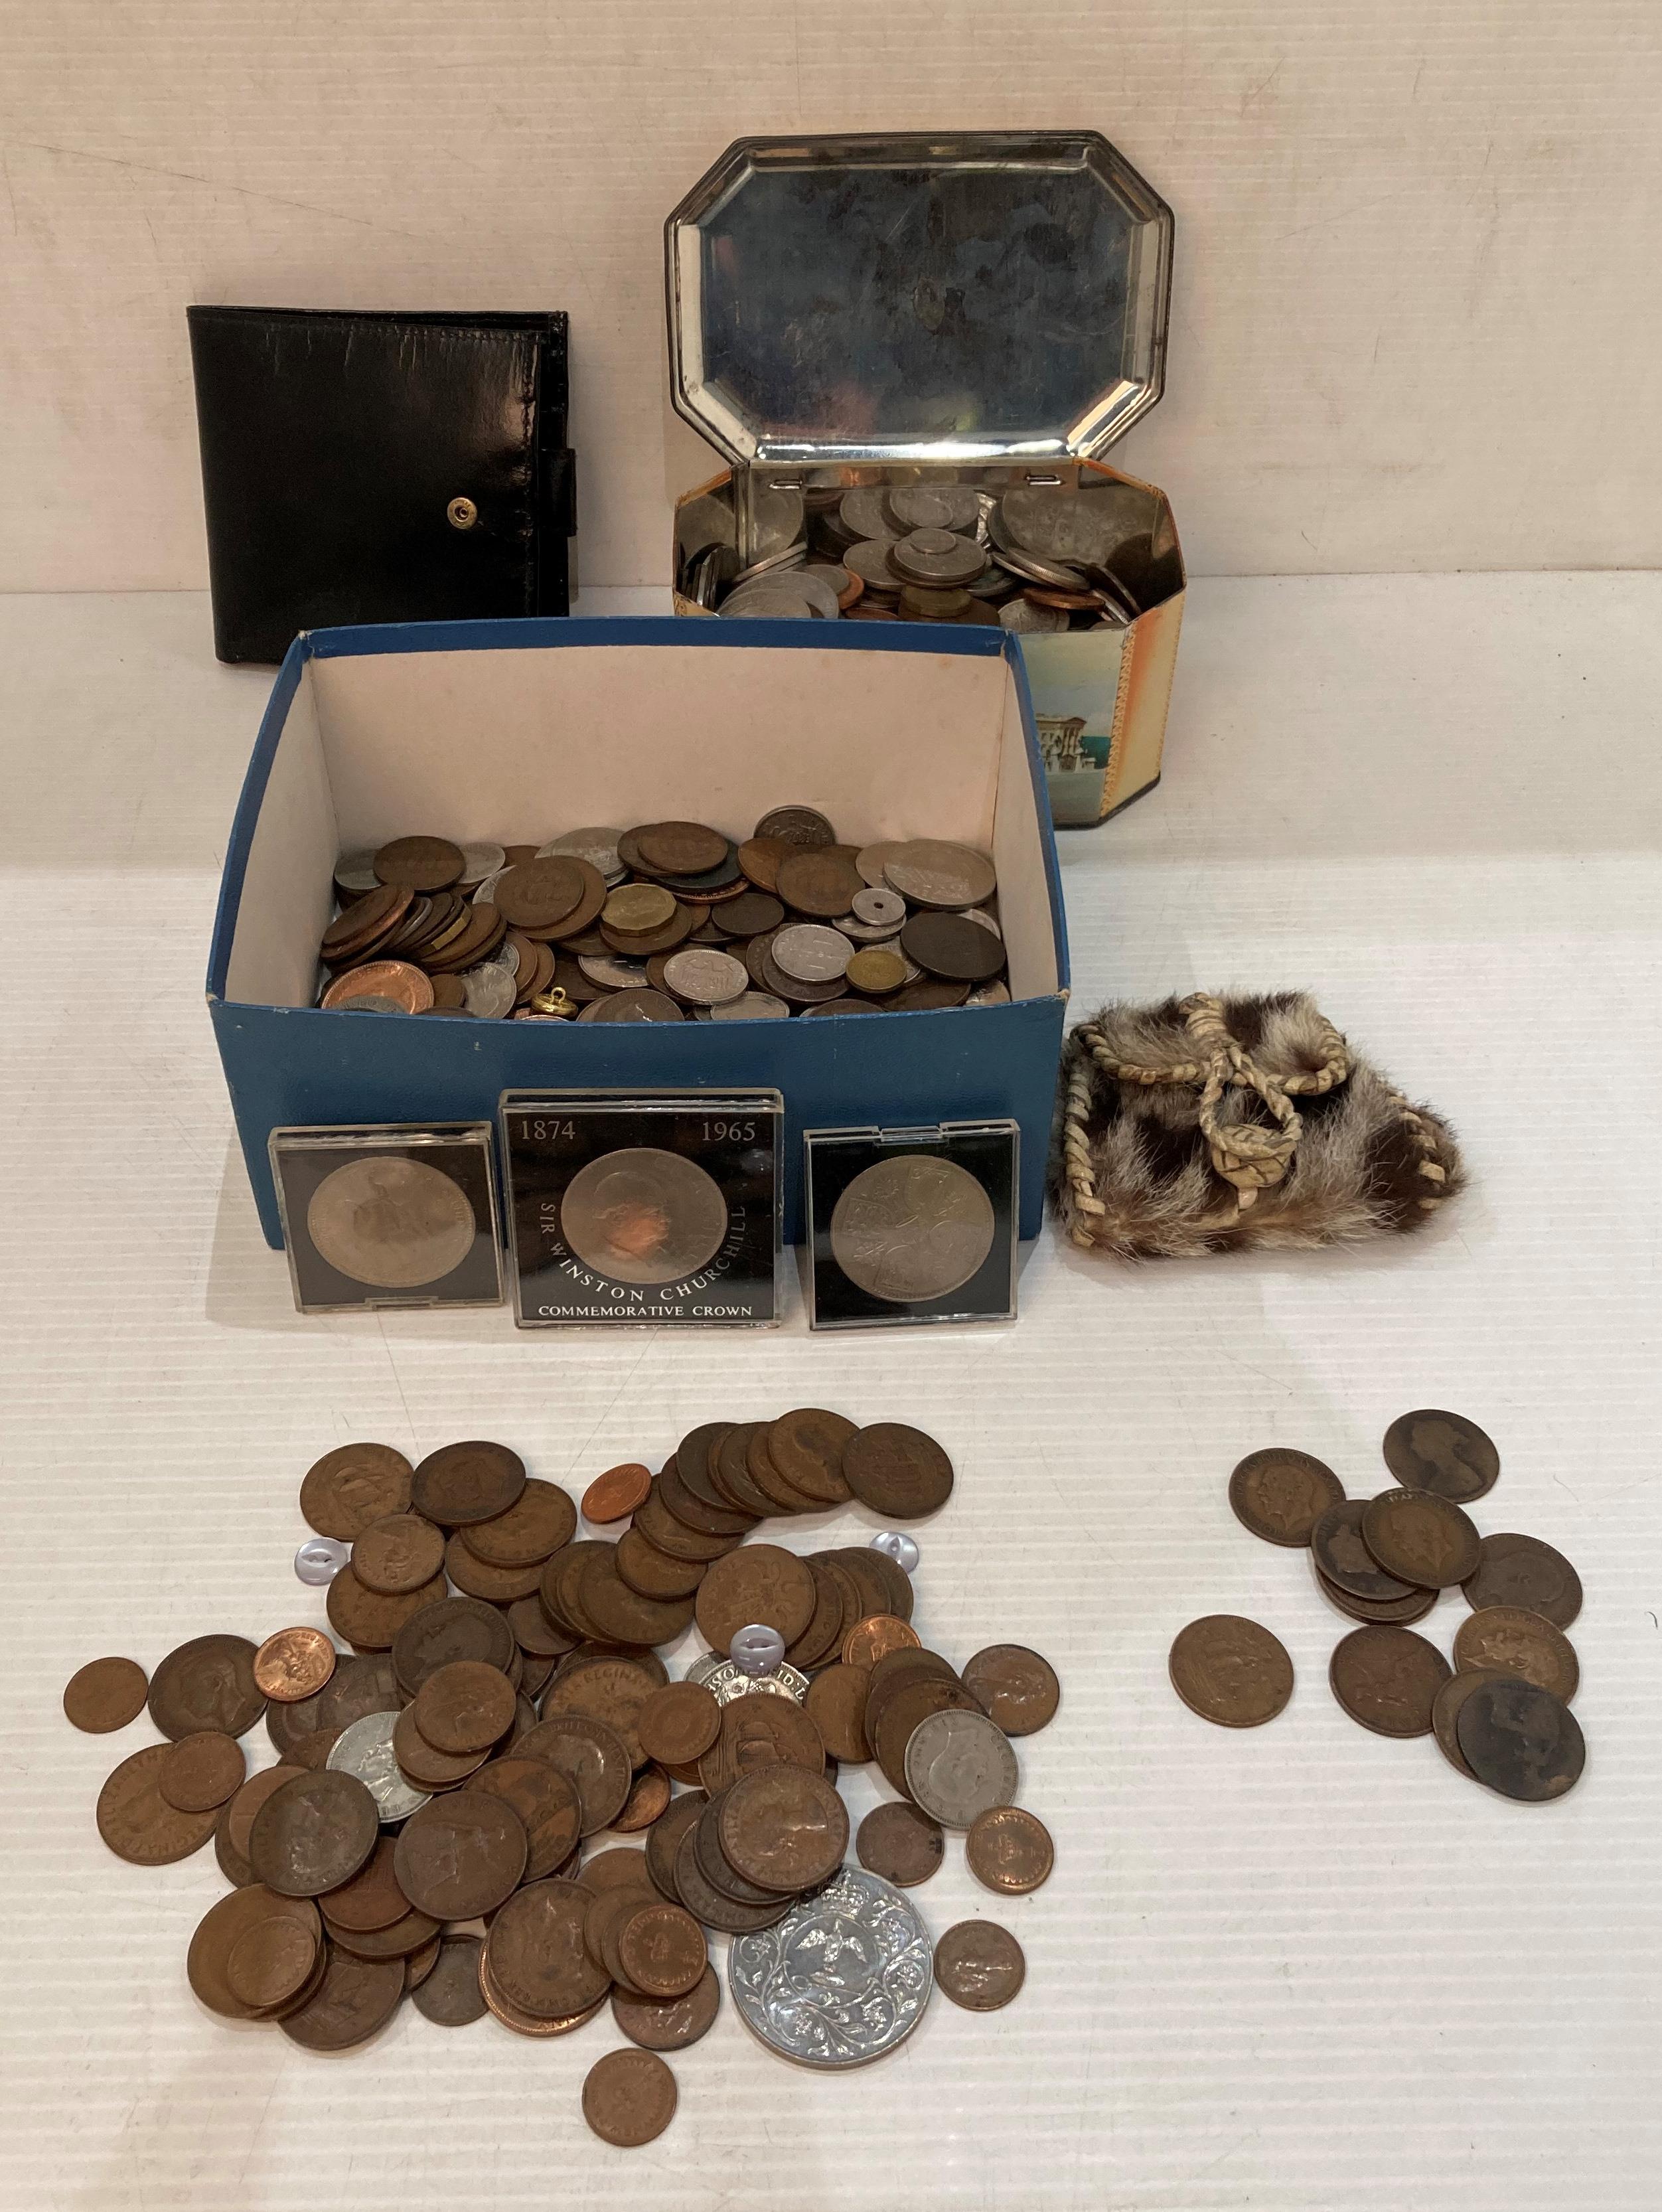 Contents to box and tin - assorted coins including British shillings, one penny, two shillings,